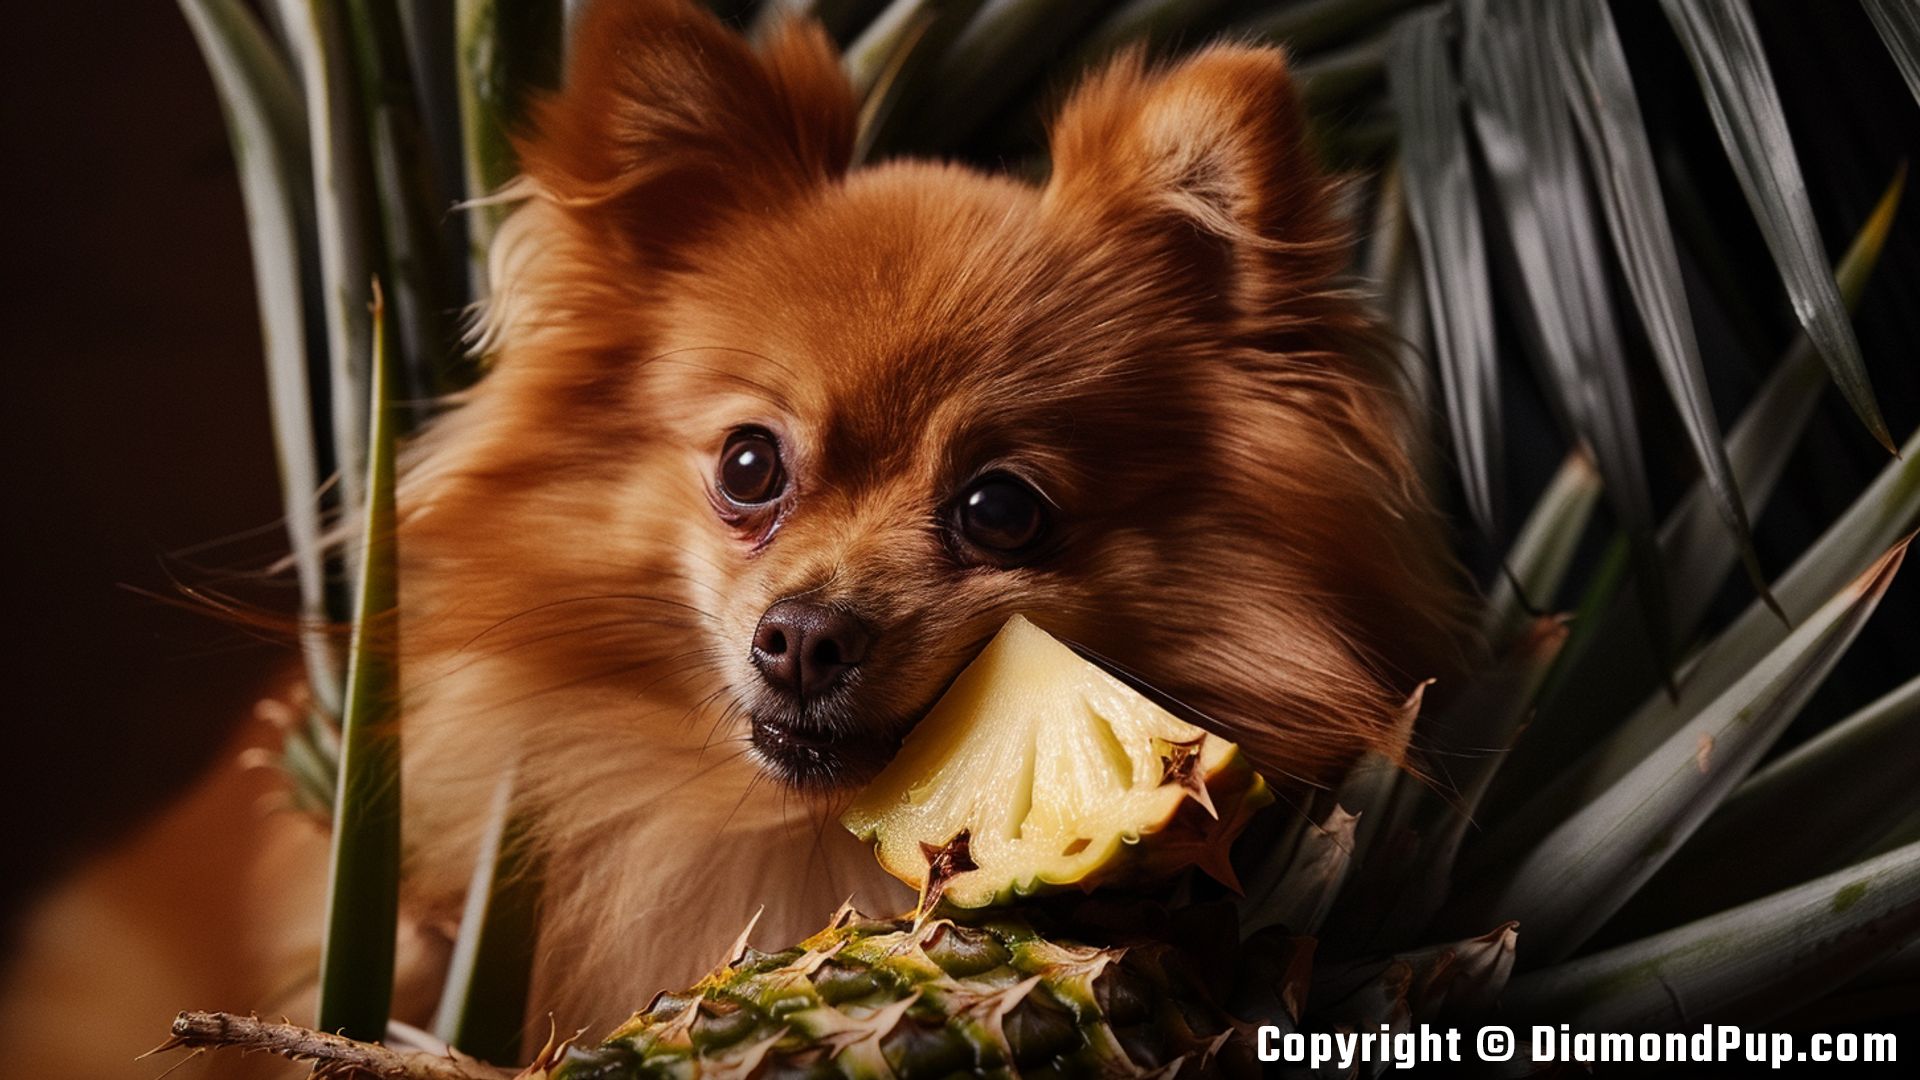 Photograph of a Cute Pomeranian Eating Pineapple